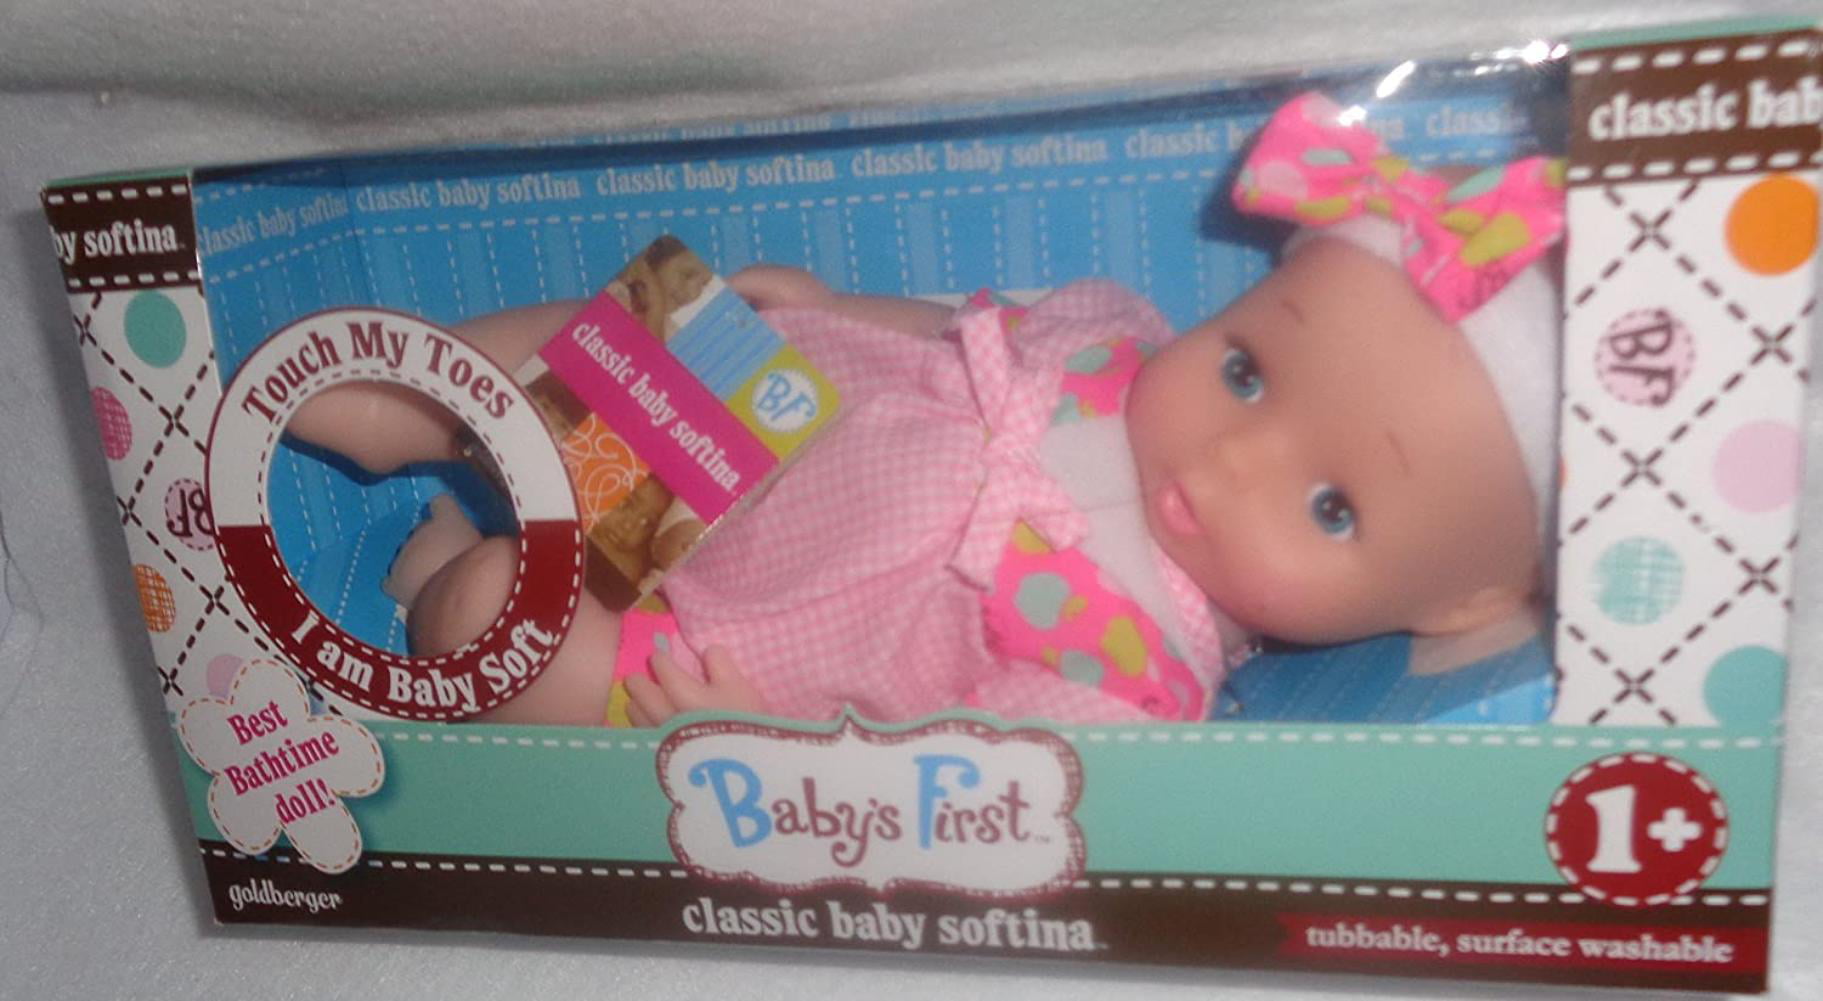 Baby's First Classic Baby Softina surface washable BEST Bathtime Doll Tubbable 